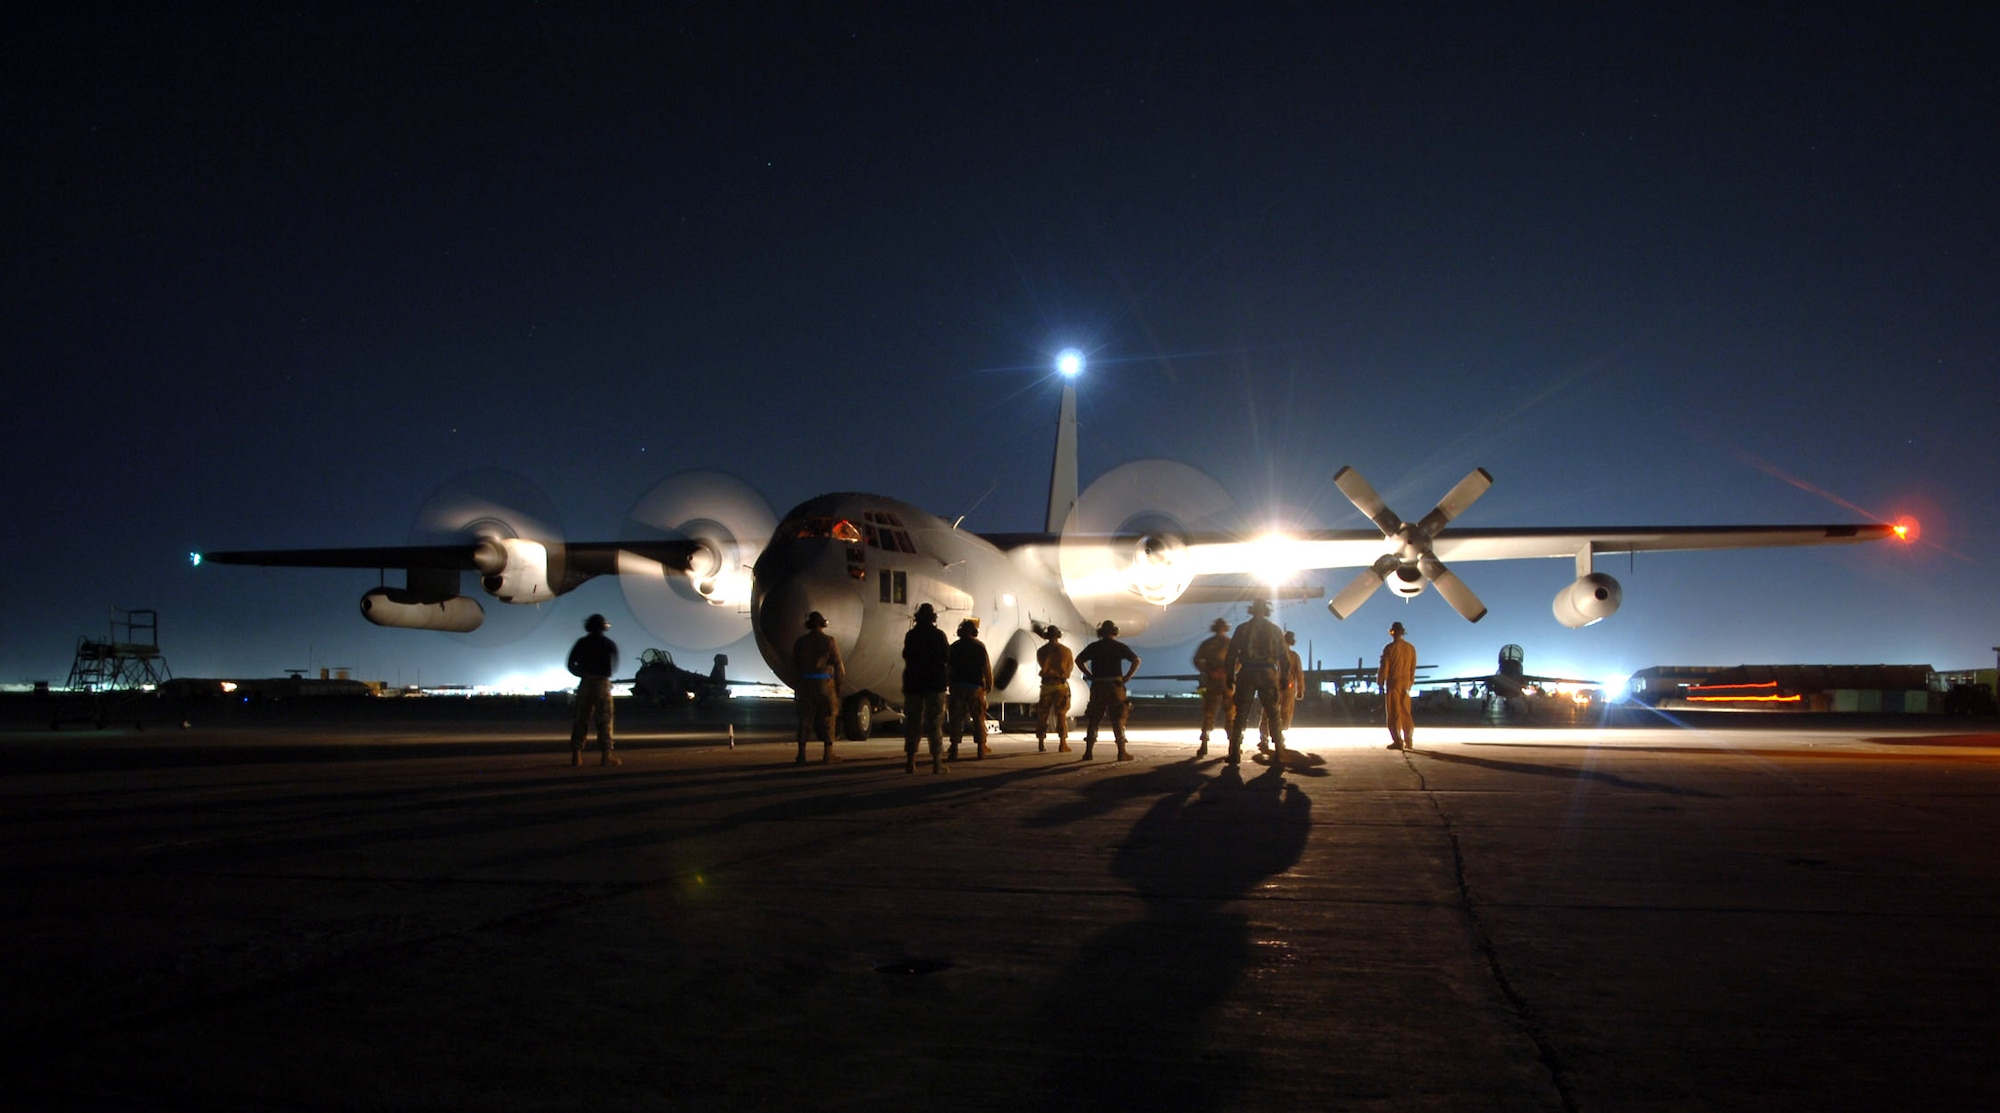 Maintainers at Bagram Air Base, Afghanistan, stand by as the aircrew starts the engines on an EC-130H Compass Call's. The aircraft is assigned to the 41st Expeditionary Electronic Combat Squadron. The Compass Call is an airborne tactical weapon system used to deny, degrade and disrupt the enemy's ability to communicate.  Since April 2004, 41st EECS EC-130s have flown more than 700 combat sorties supporting ground forces in Operation Enduring Freedom.  (U.S. Air Force photo/Capt. James H. Cunningham)
